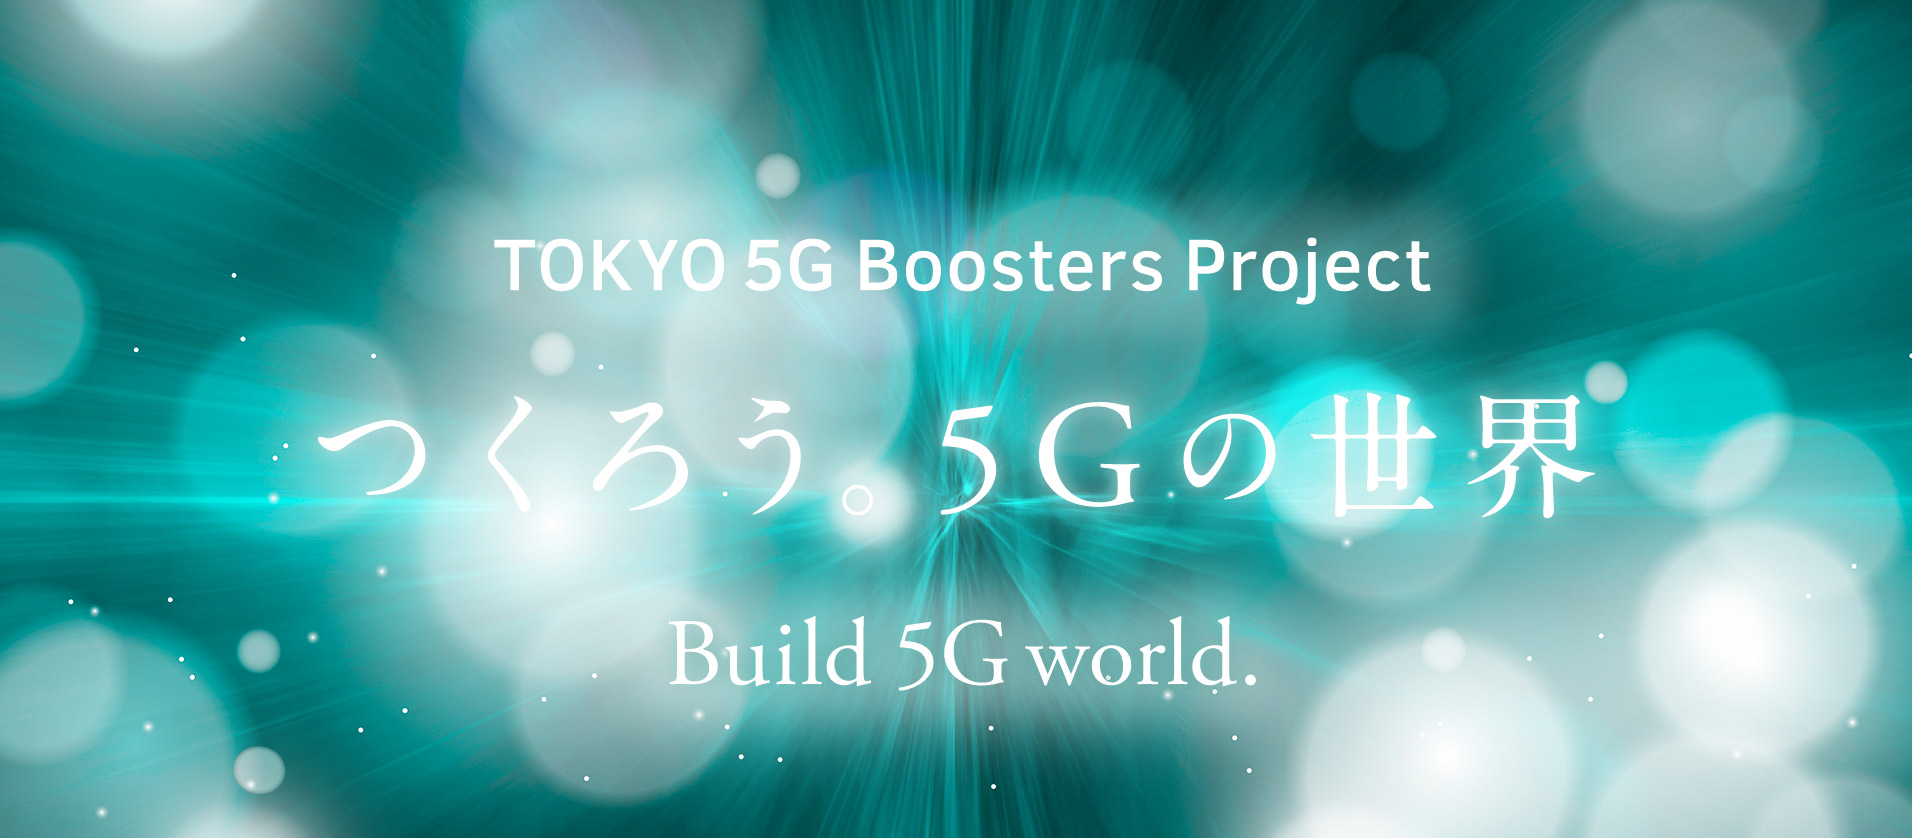 Tokyo 5G Boosters Project